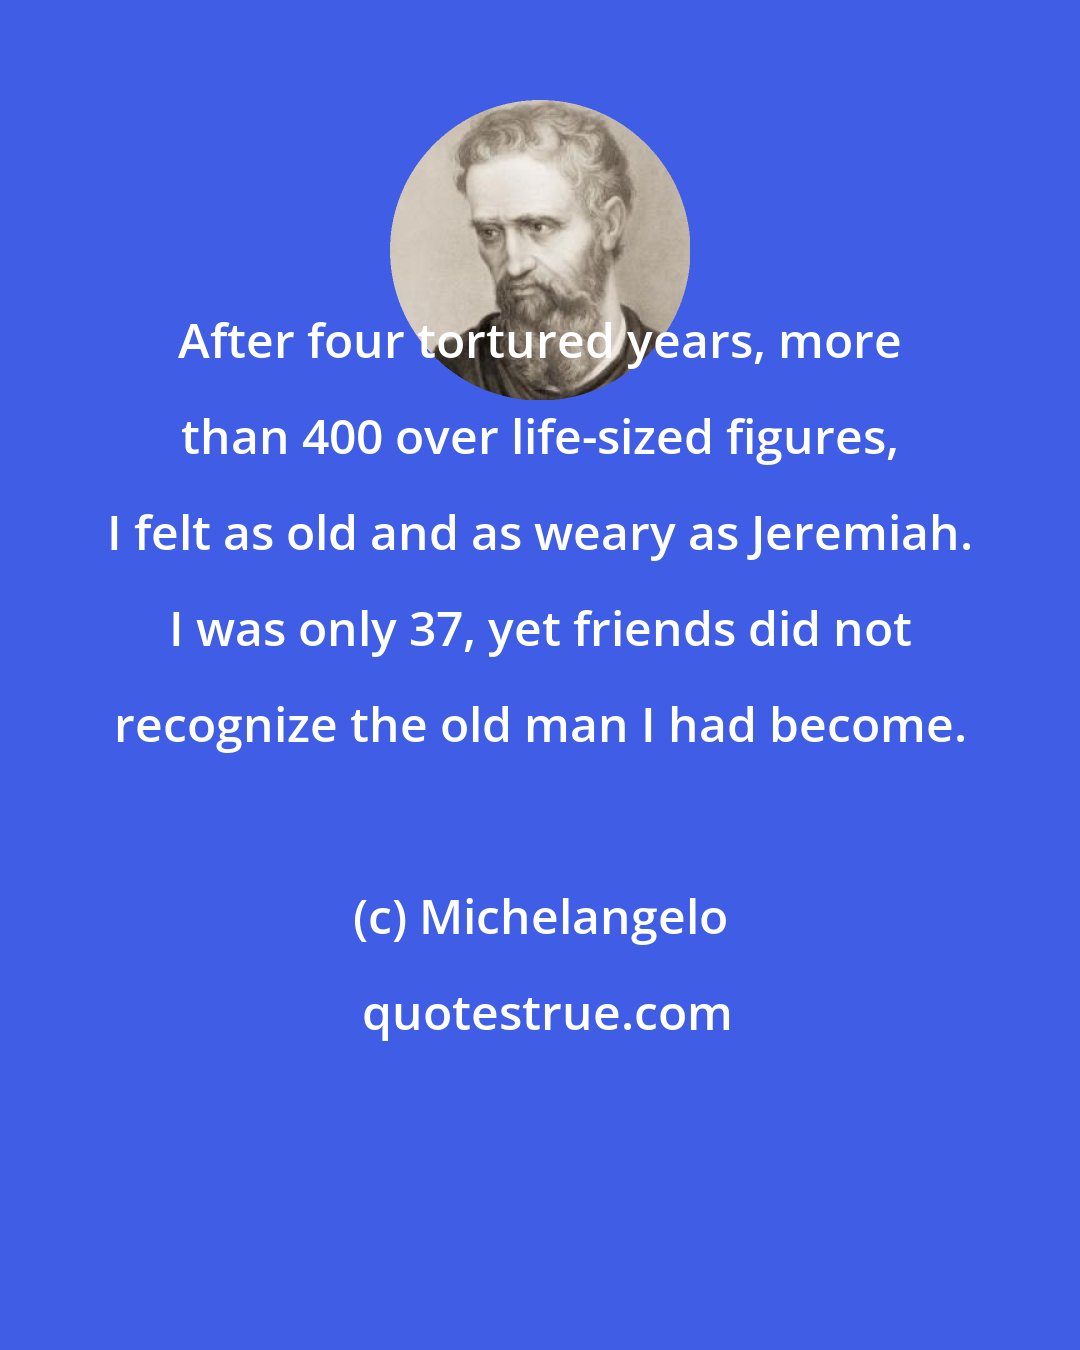 Michelangelo: After four tortured years, more than 400 over life-sized figures, I felt as old and as weary as Jeremiah. I was only 37, yet friends did not recognize the old man I had become.